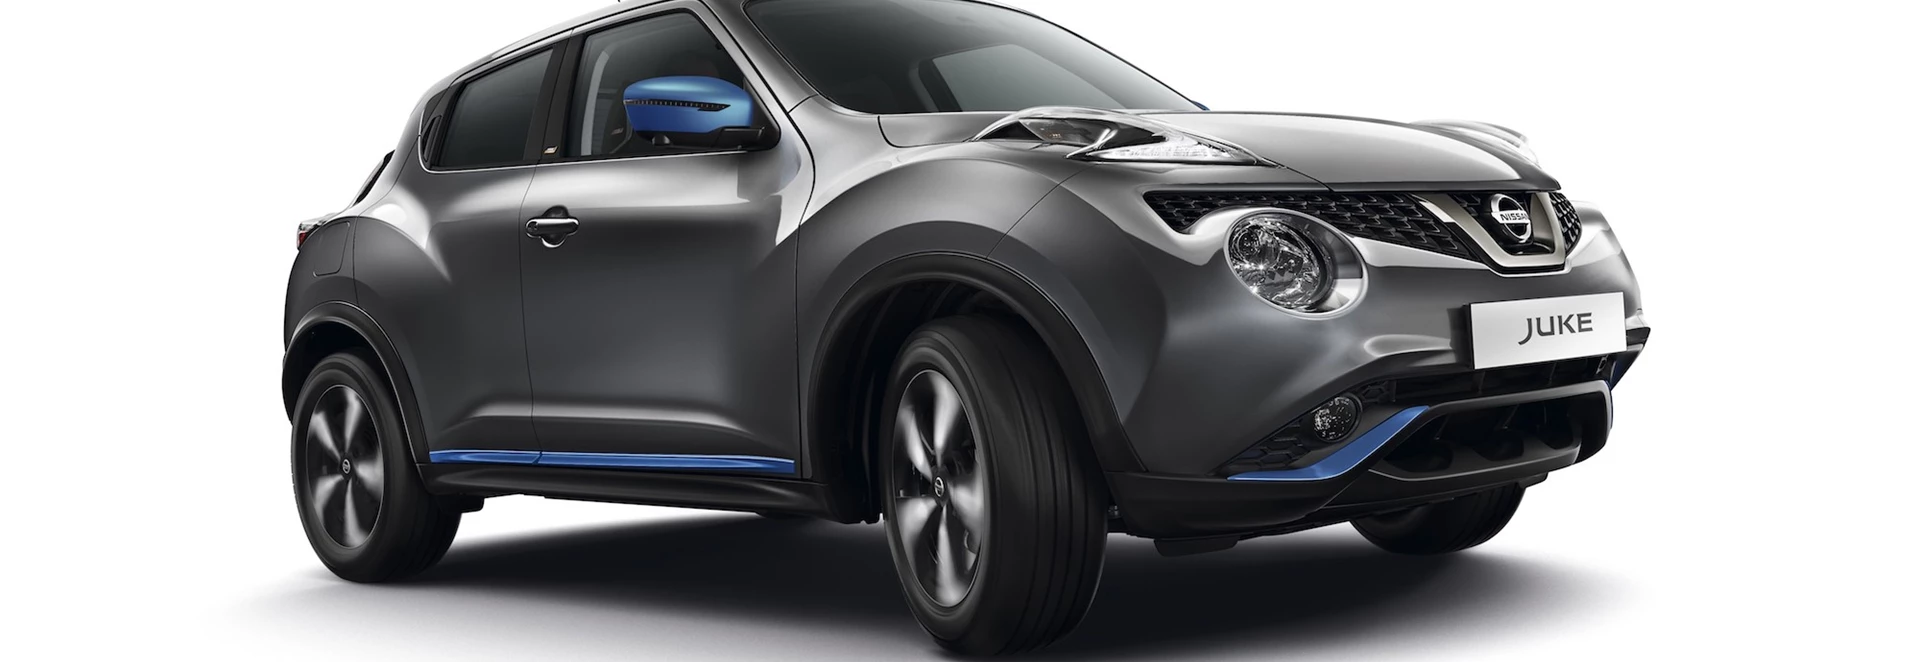 Updated Nissan Juke on sale from £15,505